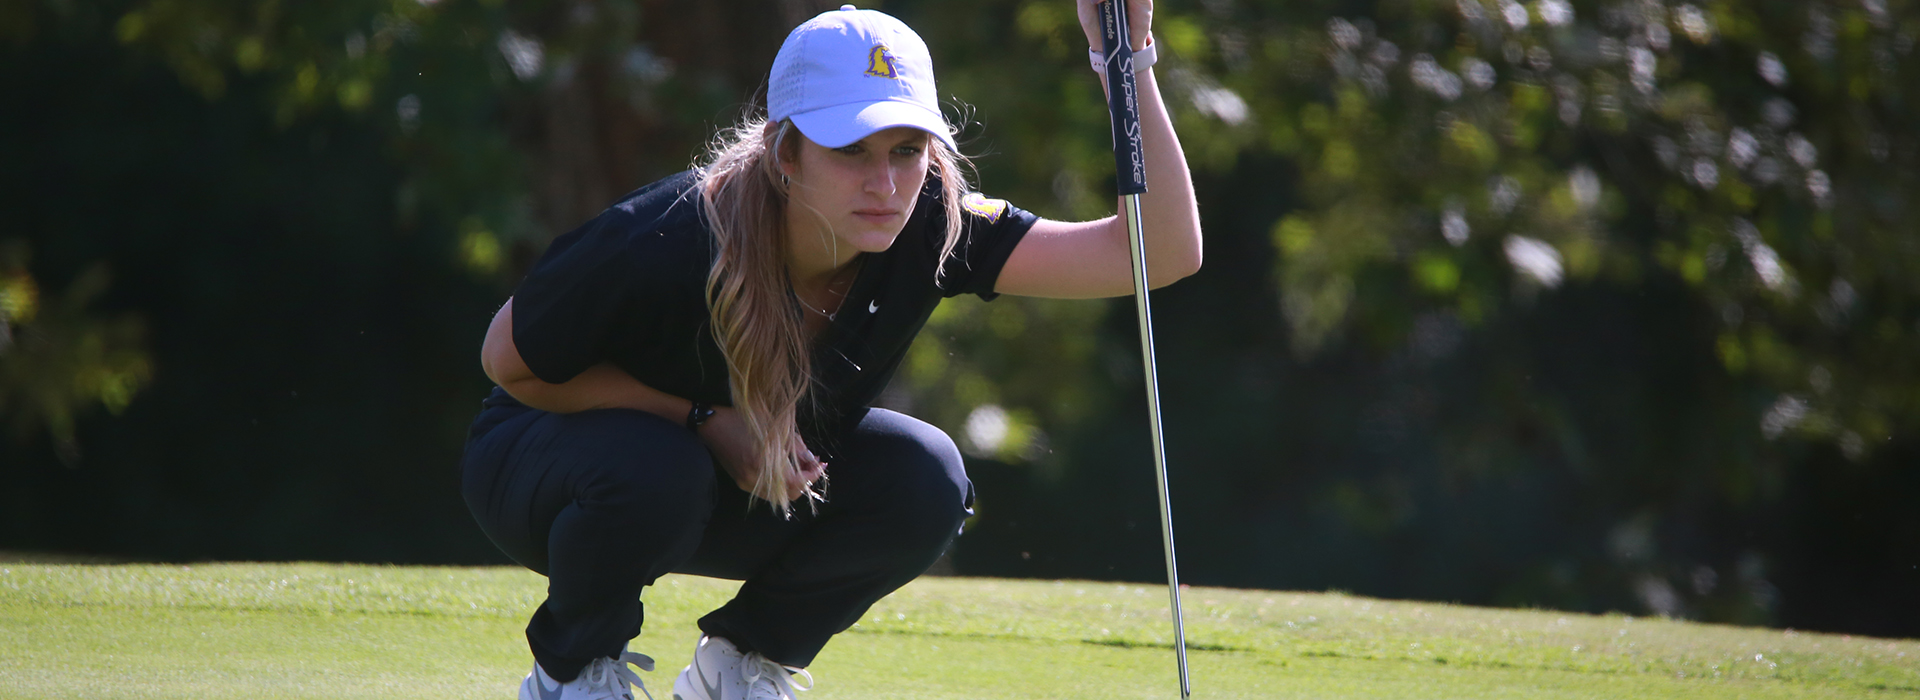 Tech women's golf team wraps up first day of play at Bobby Nichols Intercollegiate